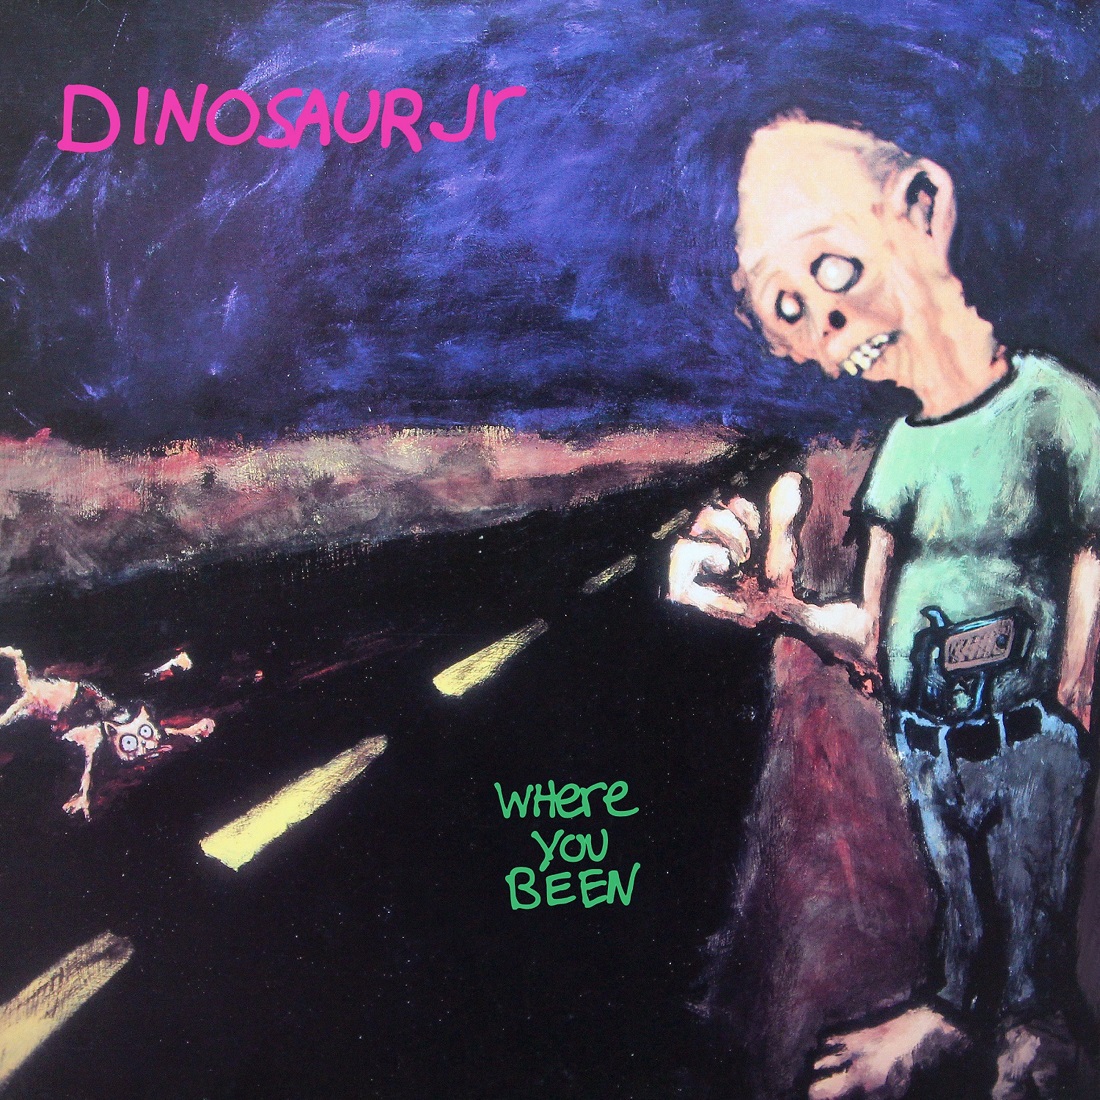 Dinosaur Jr. - Where You Been (Expanded & Remastered) (1993/2019) [FLAC 24bit/44,1kHz]